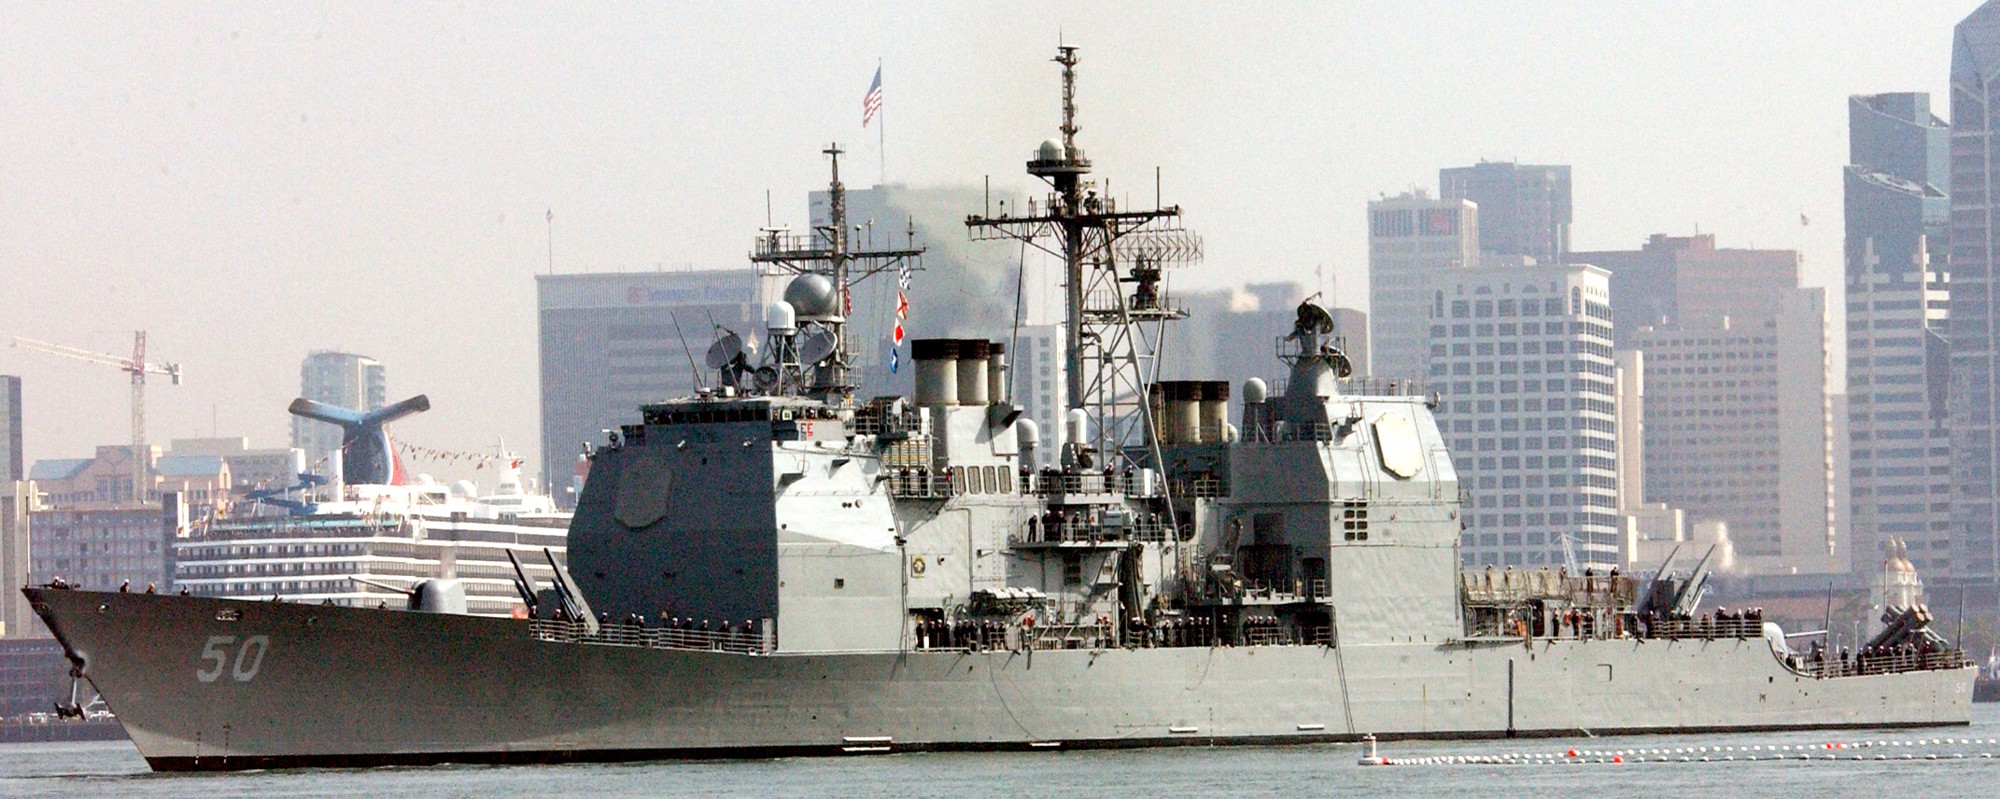 cg-50 uss valley forge ticonderoga class guided missile cruiser aegis us navy departing san diego 03